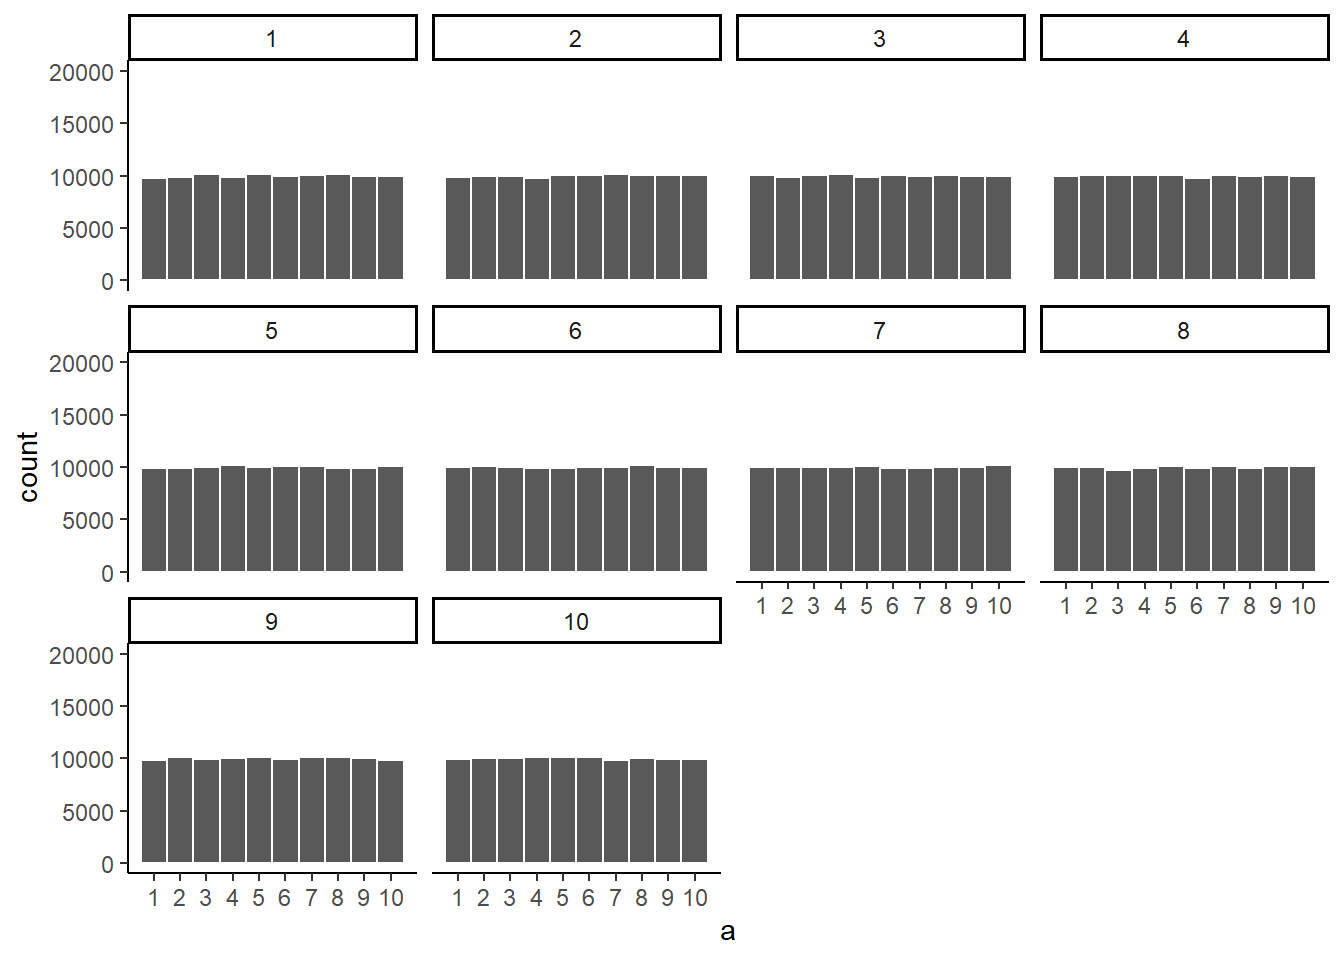 Histograms for different samples from a uniform distribution. Sample-size = 100,000 for each sample.